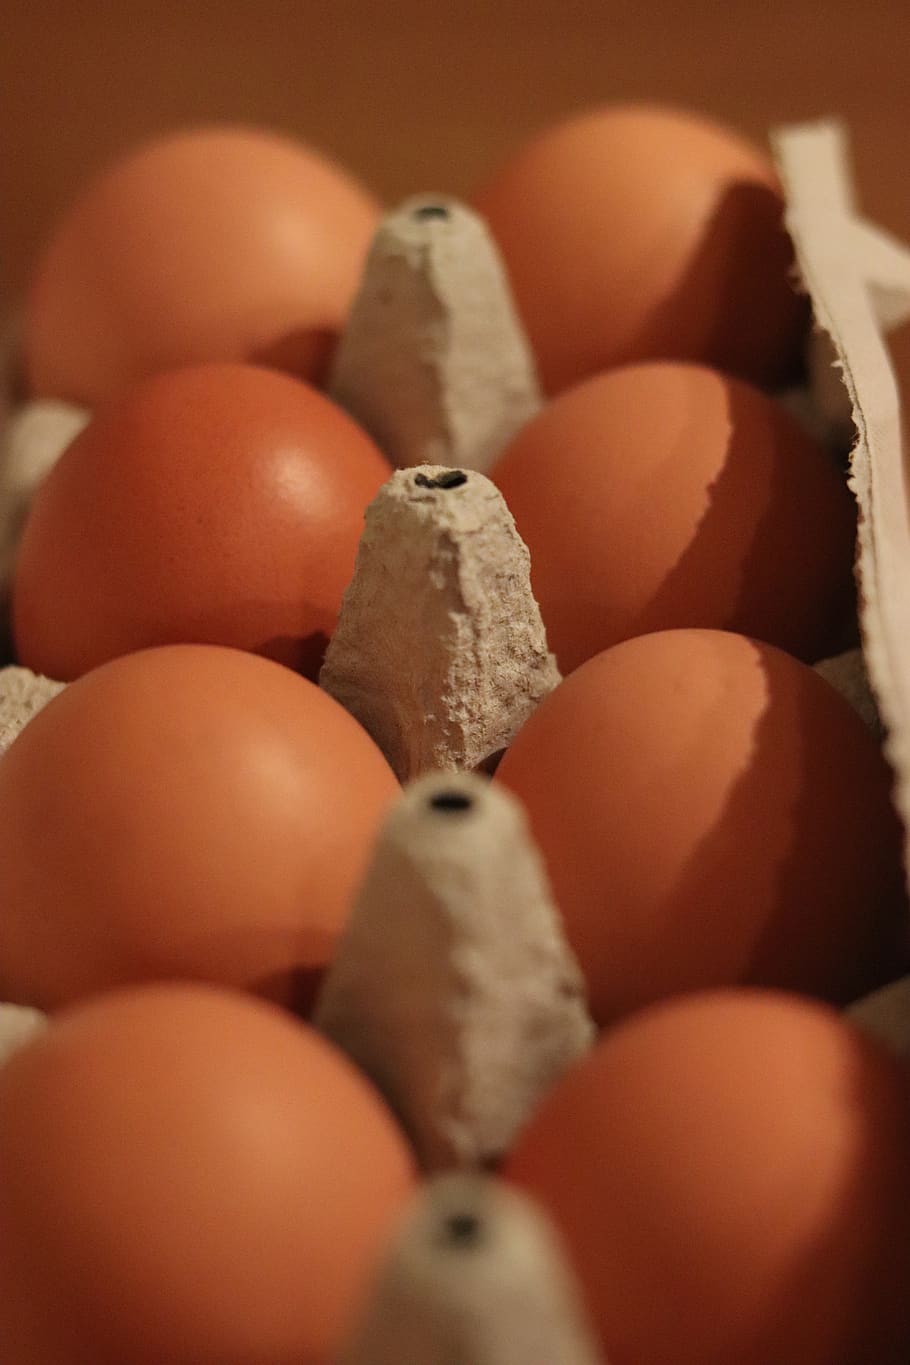 eggs, box, power, food, food and drink, freshness, selective focus, still life, close-up, healthy eating